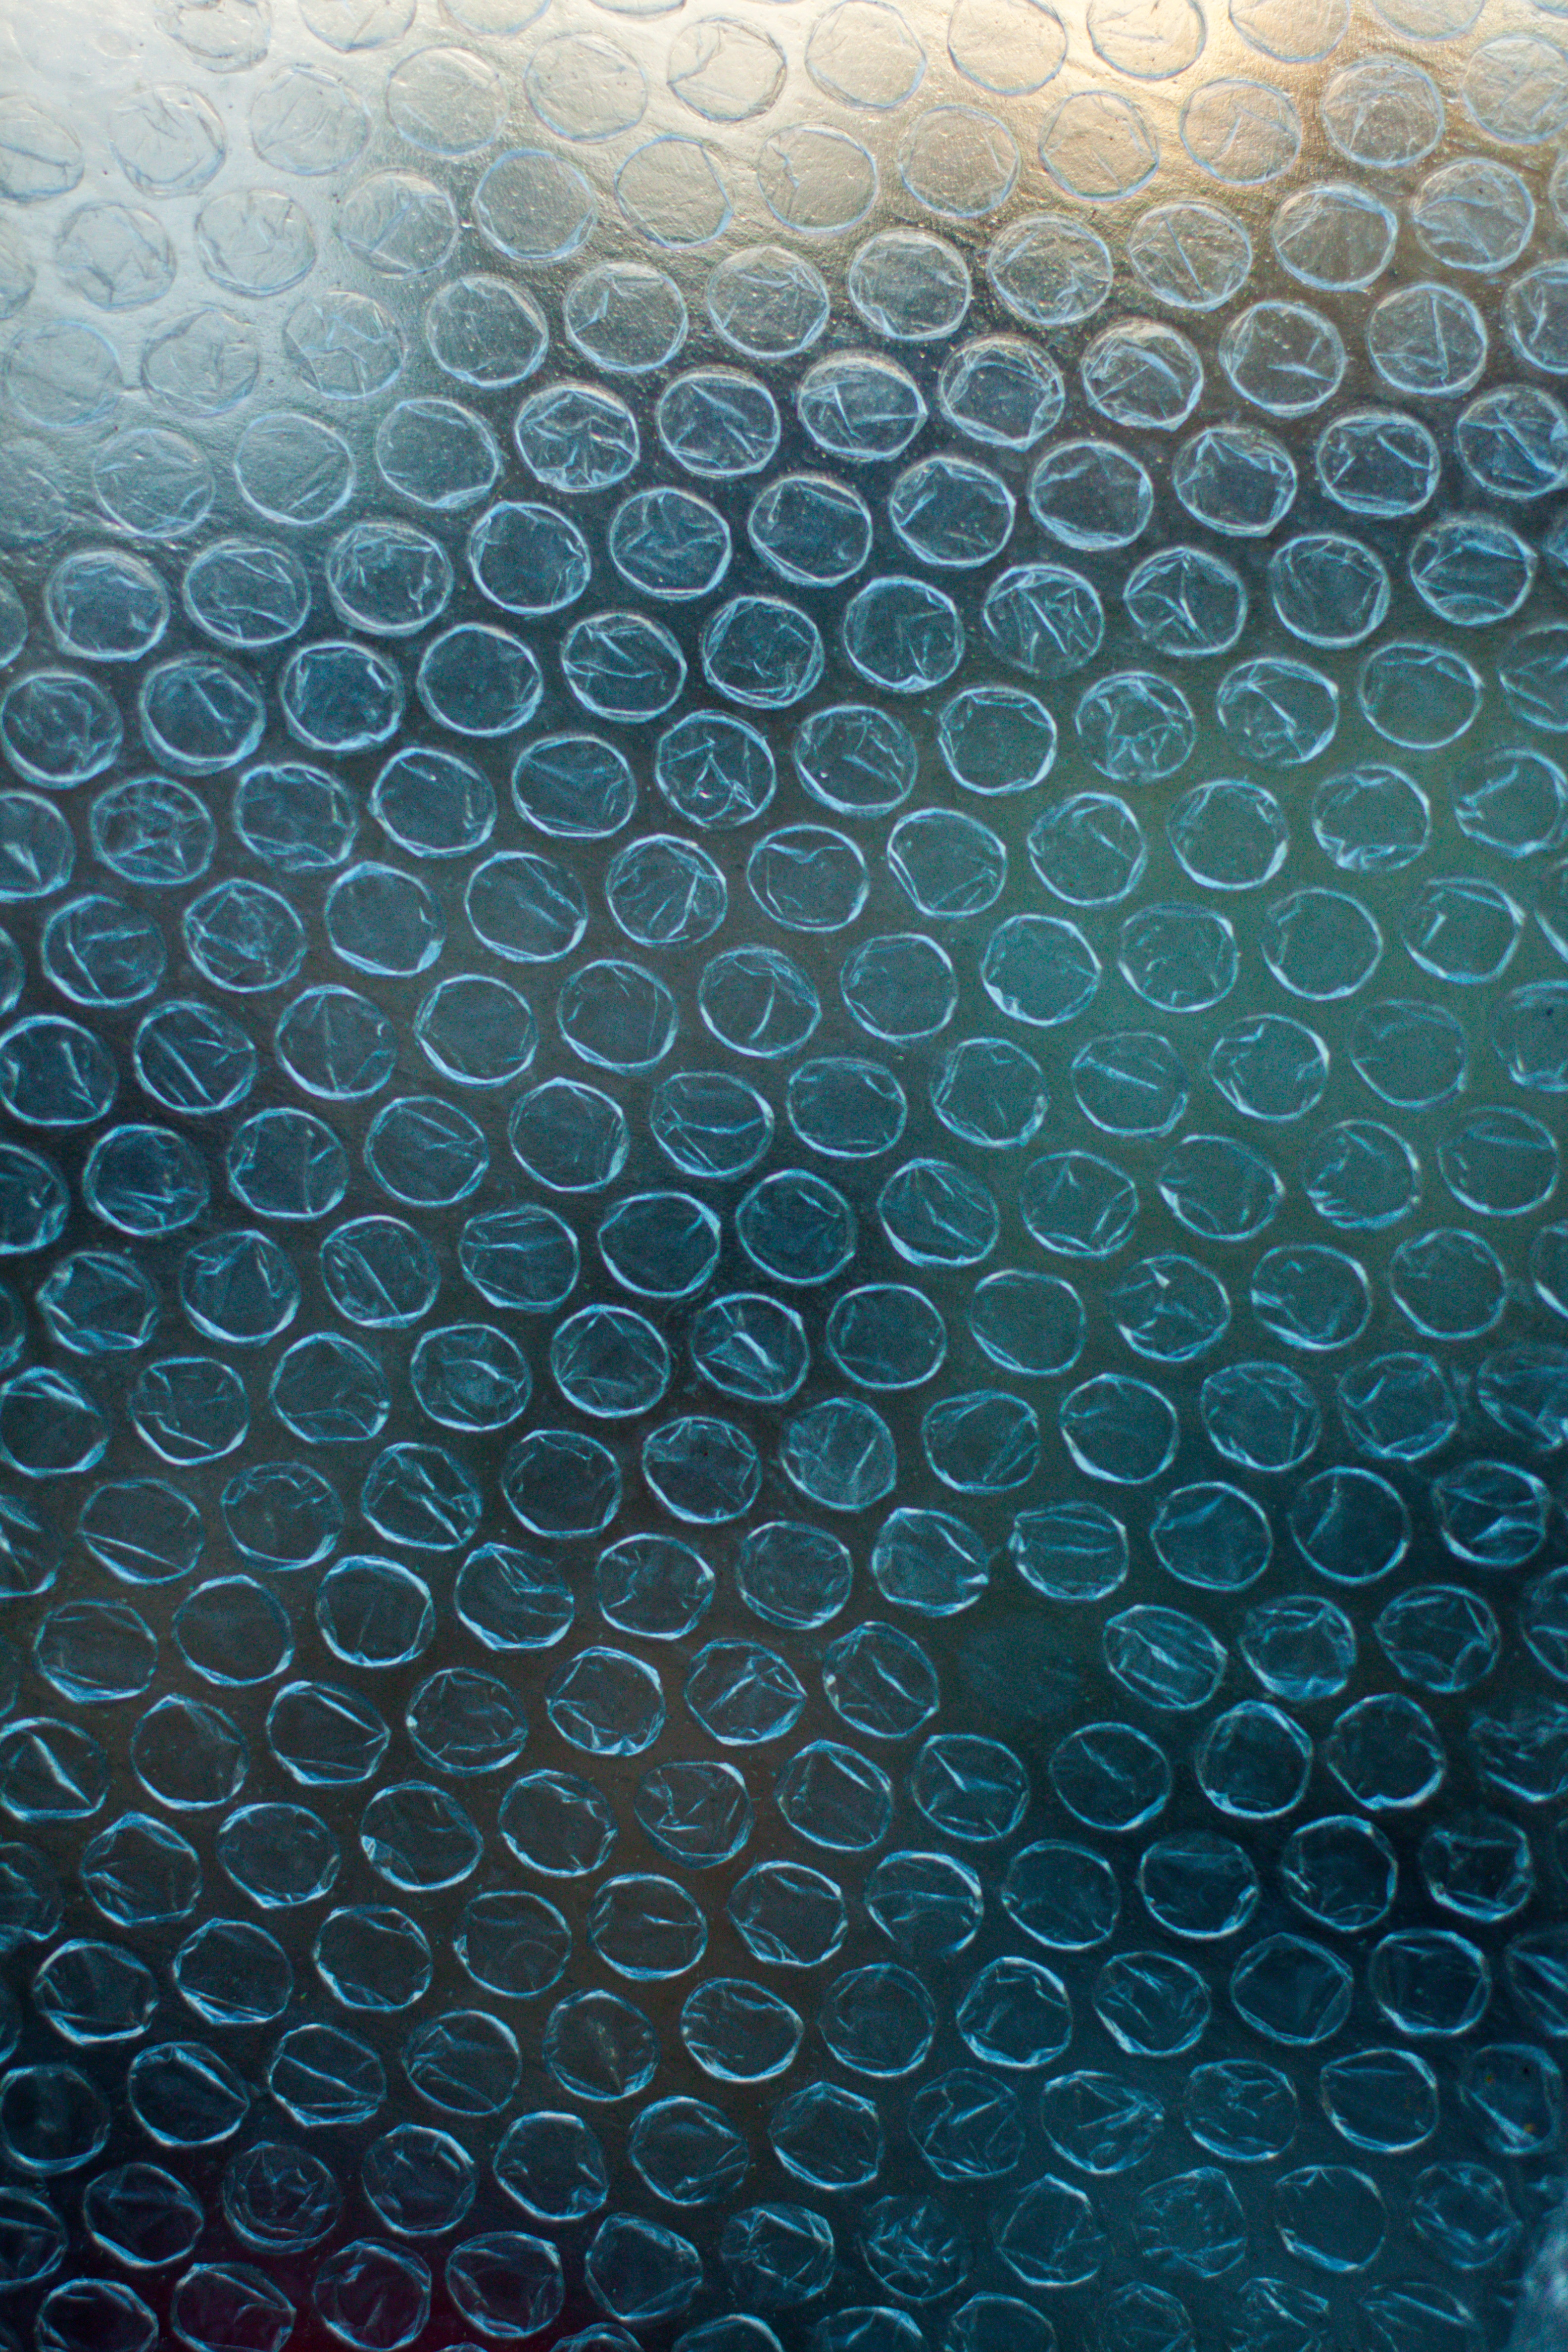 package, bubbles, circles, texture, textures, surface, packet